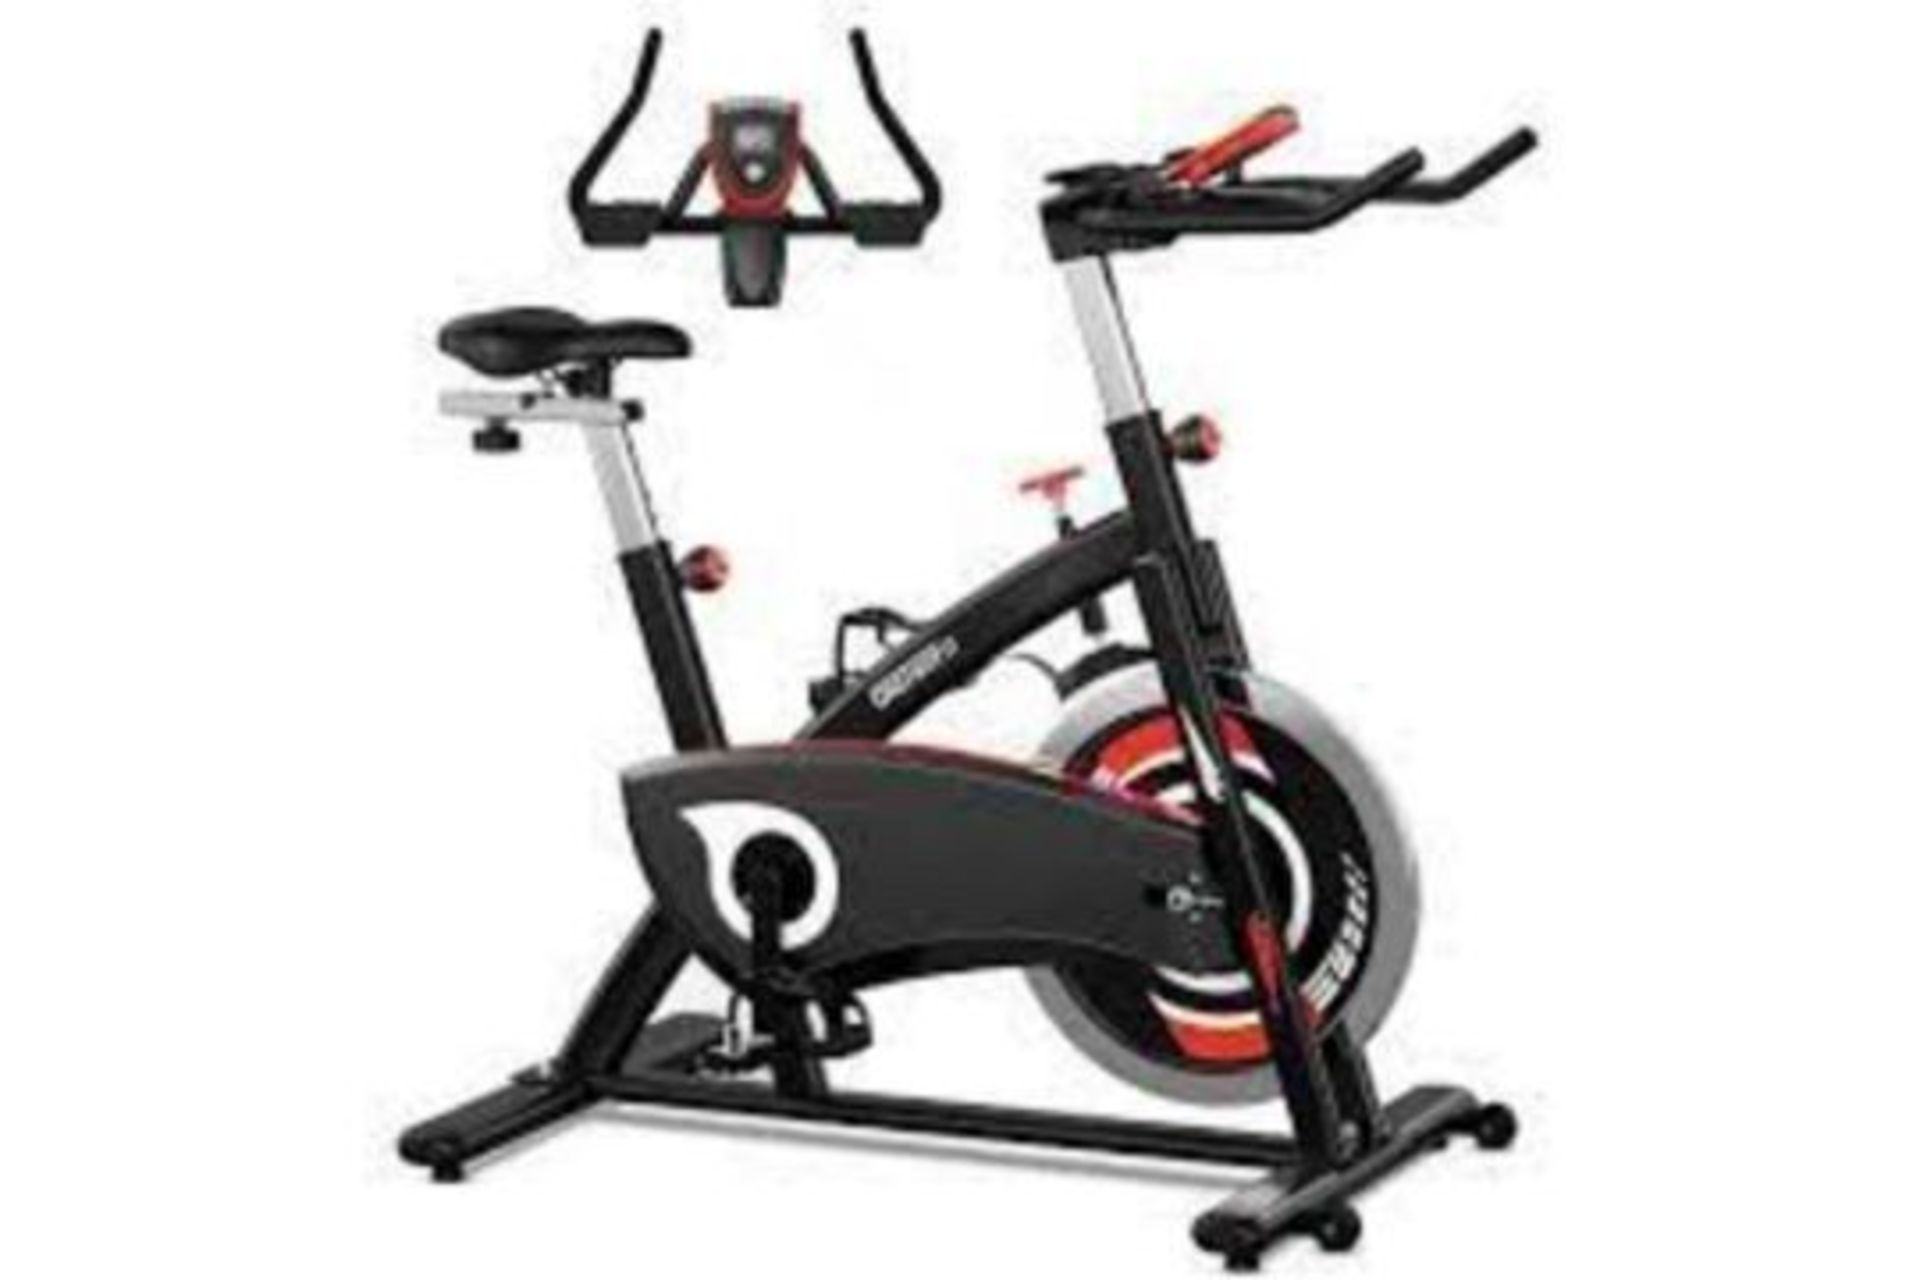 PALLET TO INCLUDE 5 X BRAND NEW ONETWOFIT EXERCISE BIKE, INDOOR CYCLING BIKE WITH 44LBS FLYWHEEL, - Image 2 of 2